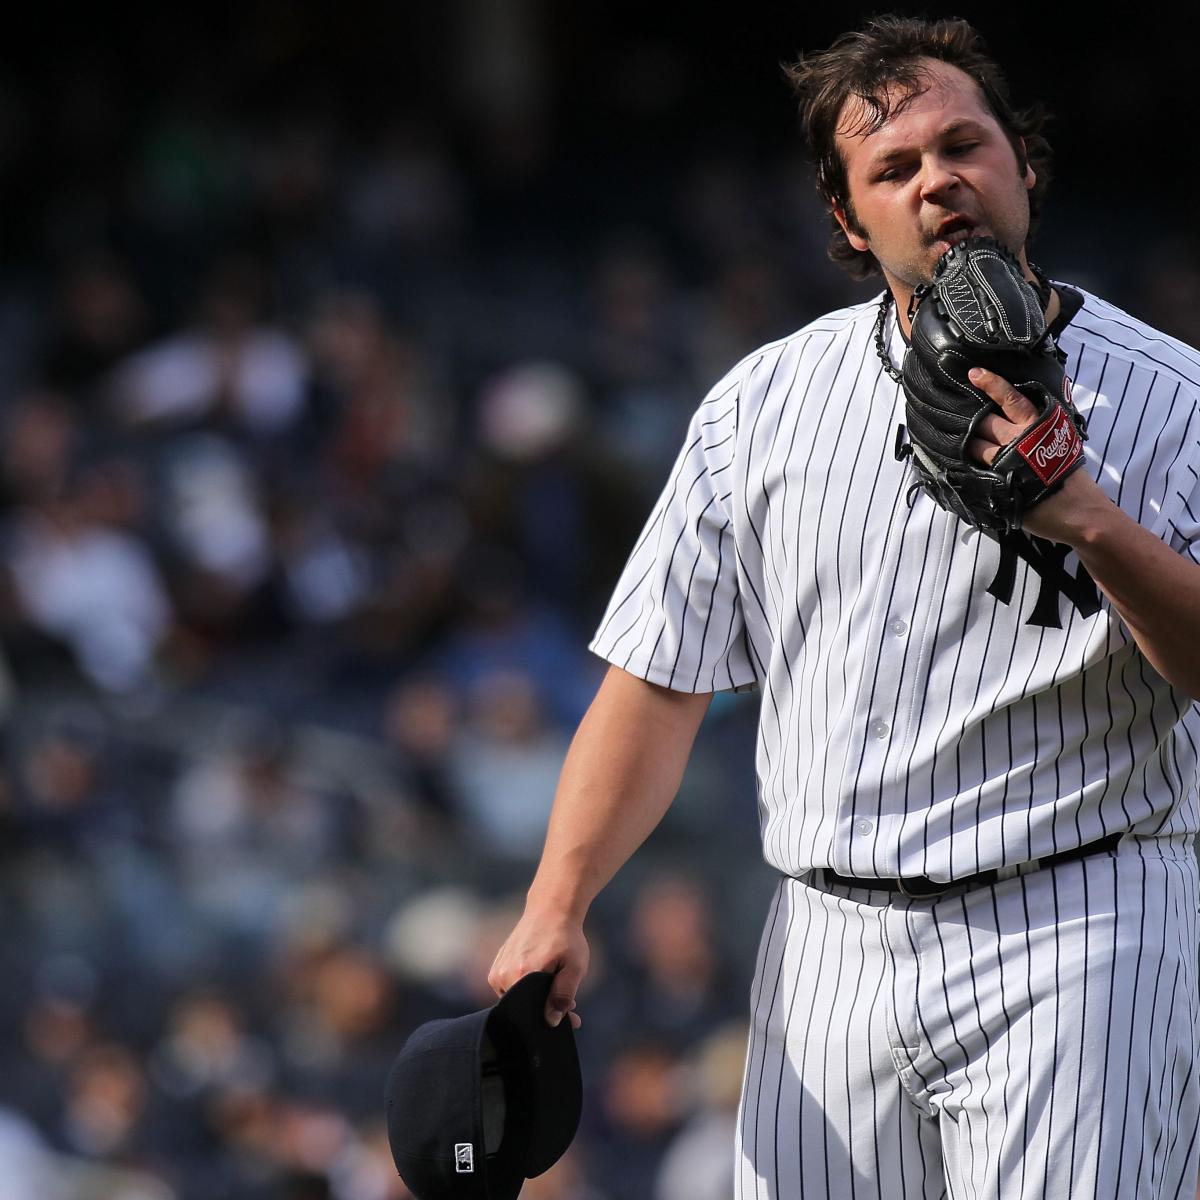 New York Yankees relief pitcher Joba Chamberlain reacts after a double play  ends the seventh inning against the Toronto Blue Jays at Yankee Stadium in  New York on Saturday, September 4, 2010.